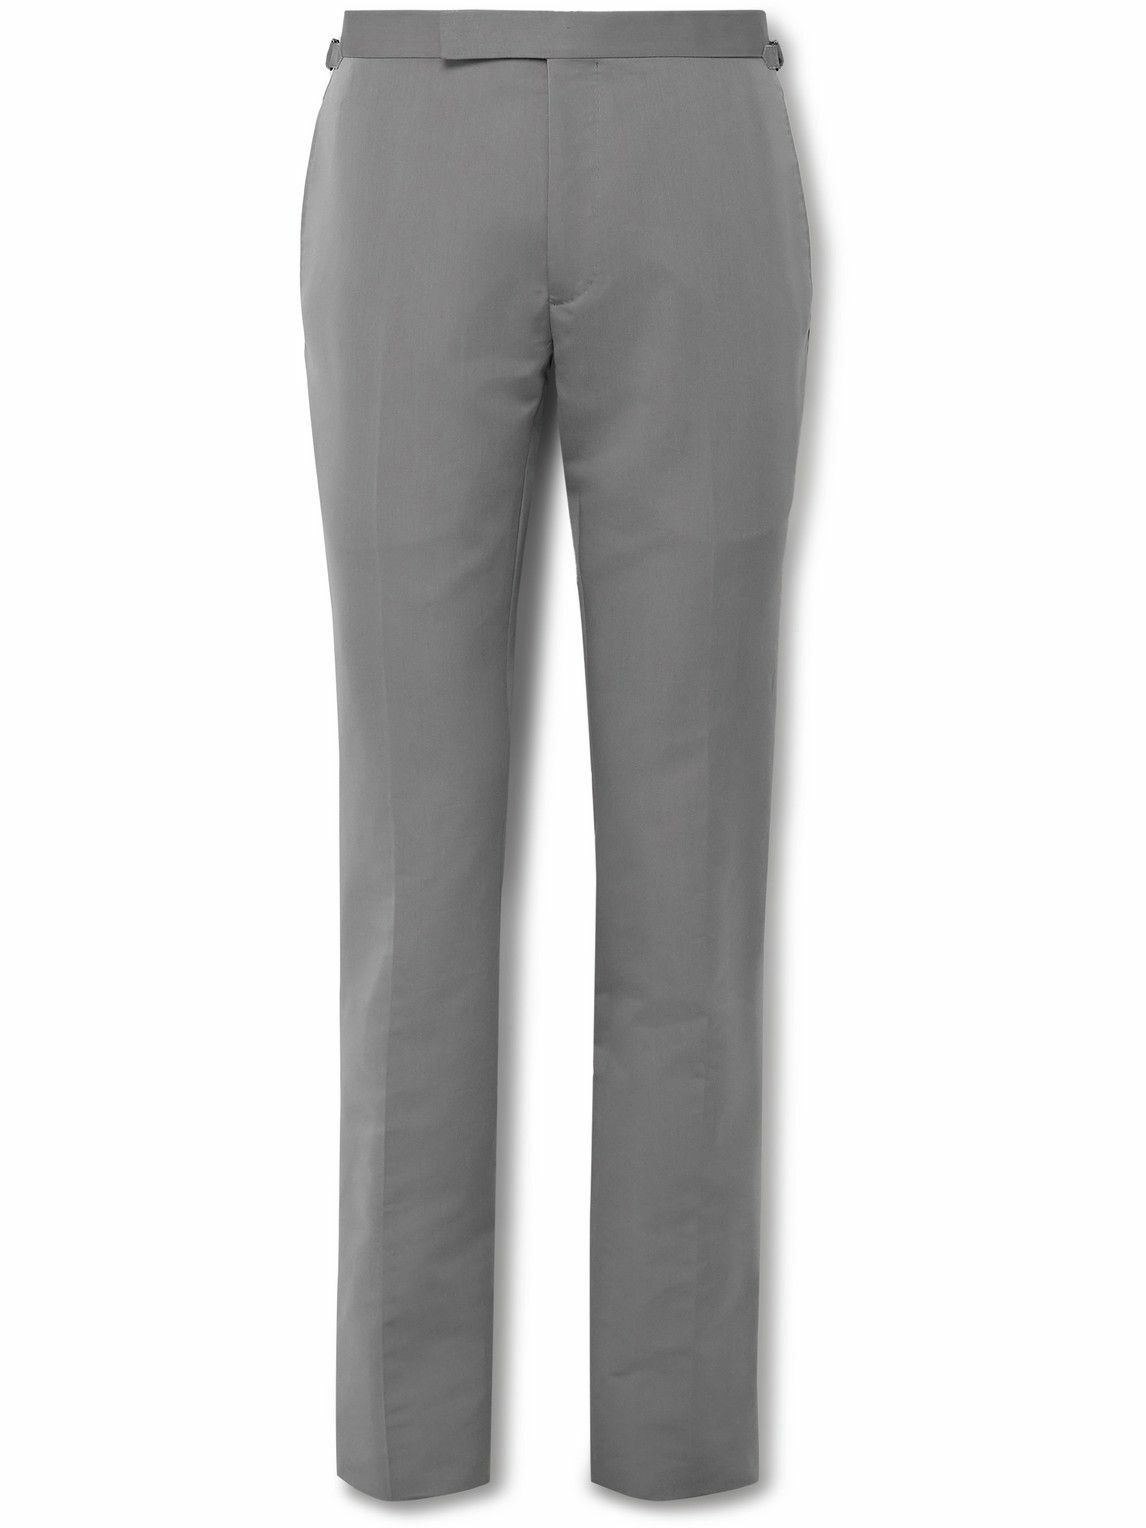 Beige and Black Plain Cotton Formal Chinos Trousers at Rs 585/piece in  Gurgaon